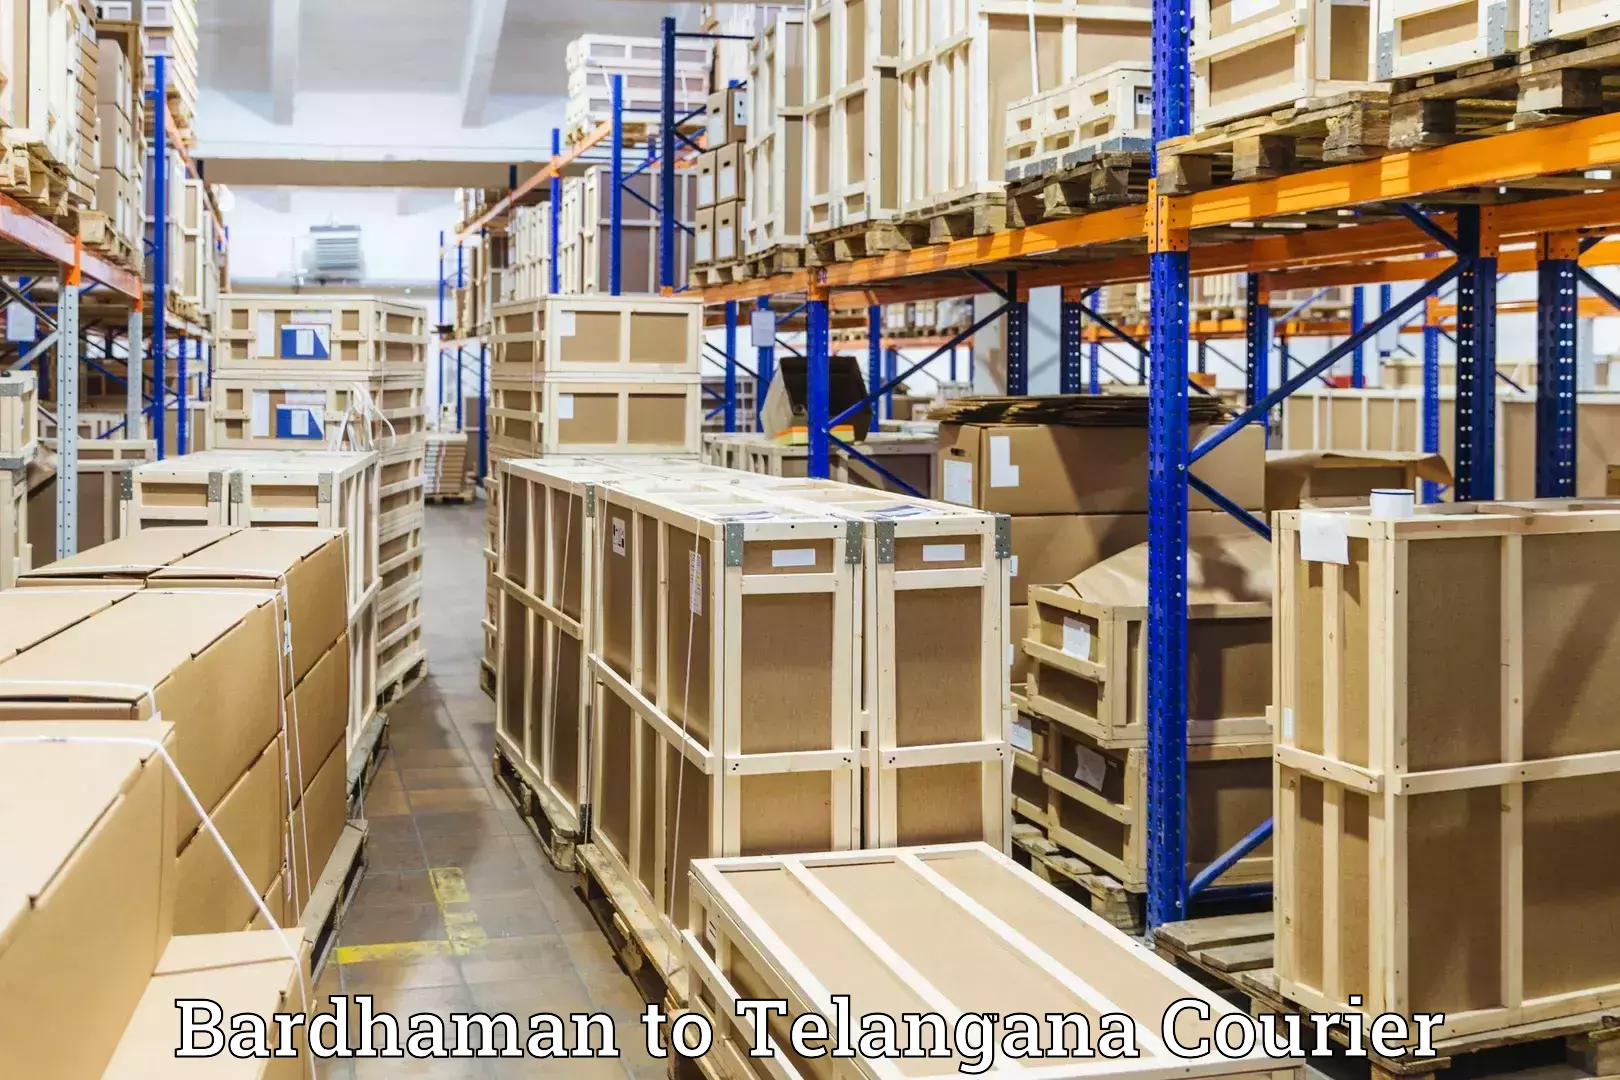 Luggage shipment specialists Bardhaman to Asifabad